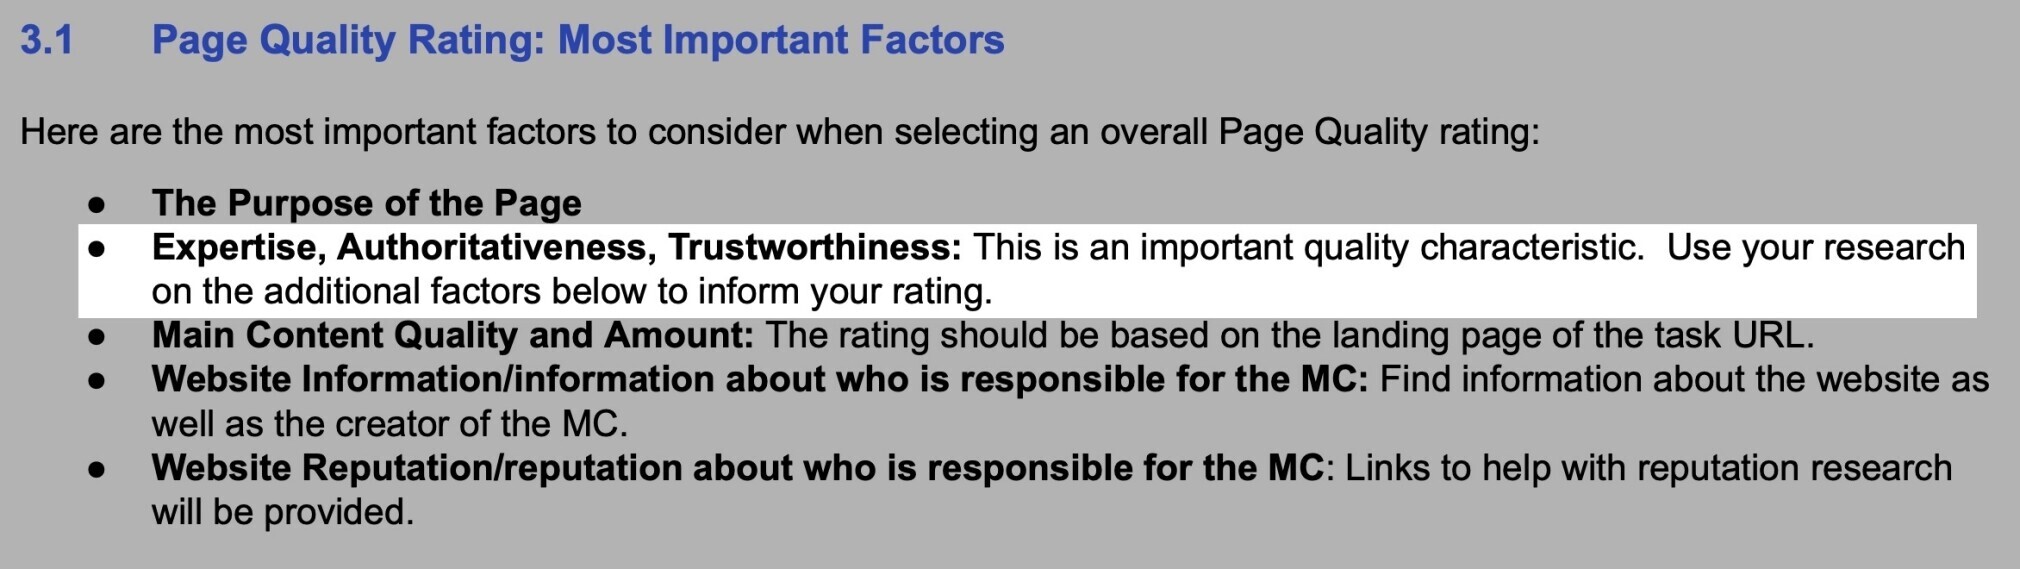 page quality guidelines